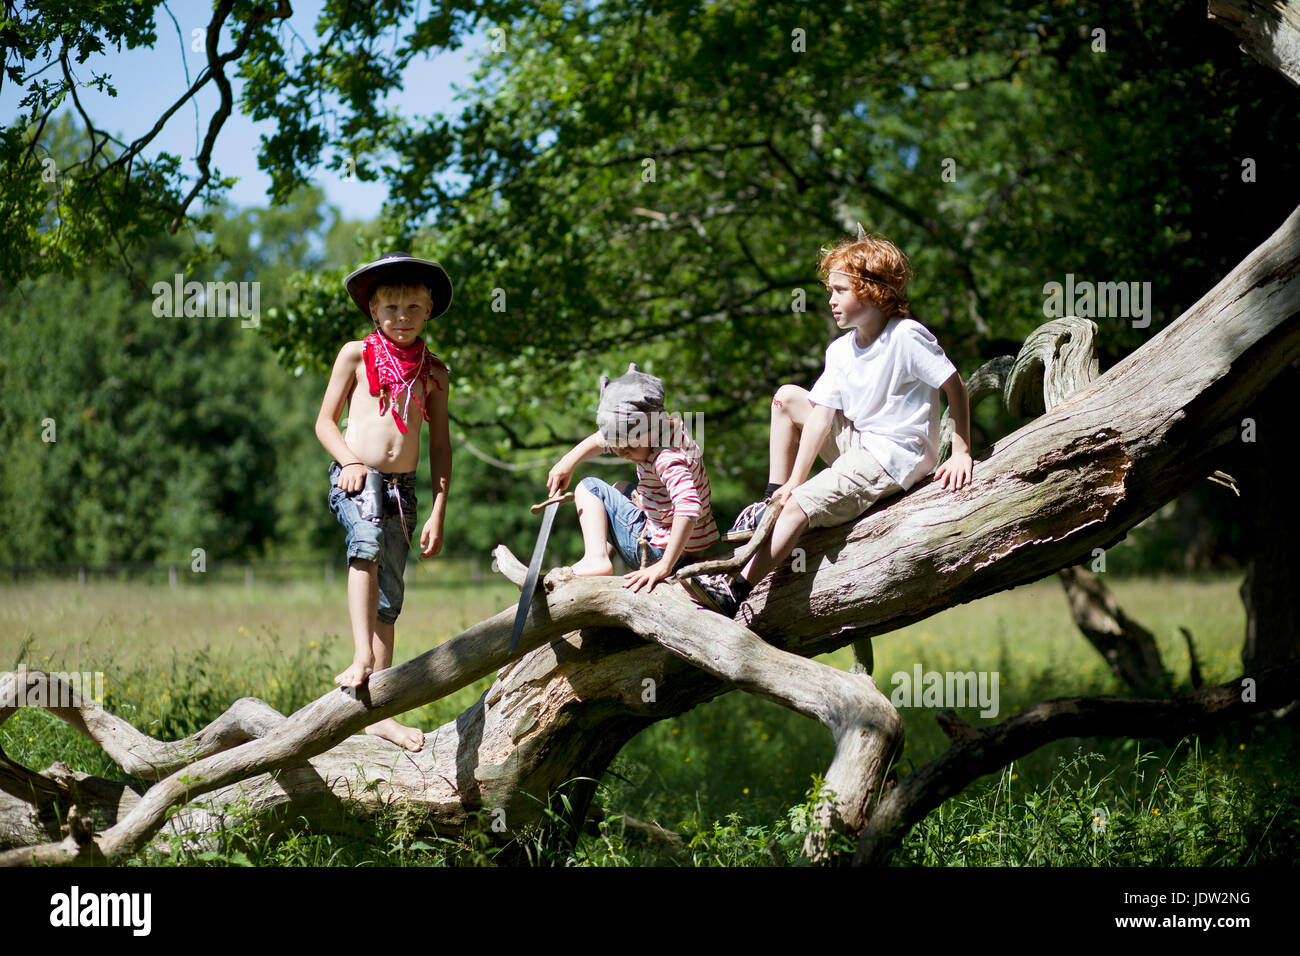 Children in costumes playing on tree Stock Photo